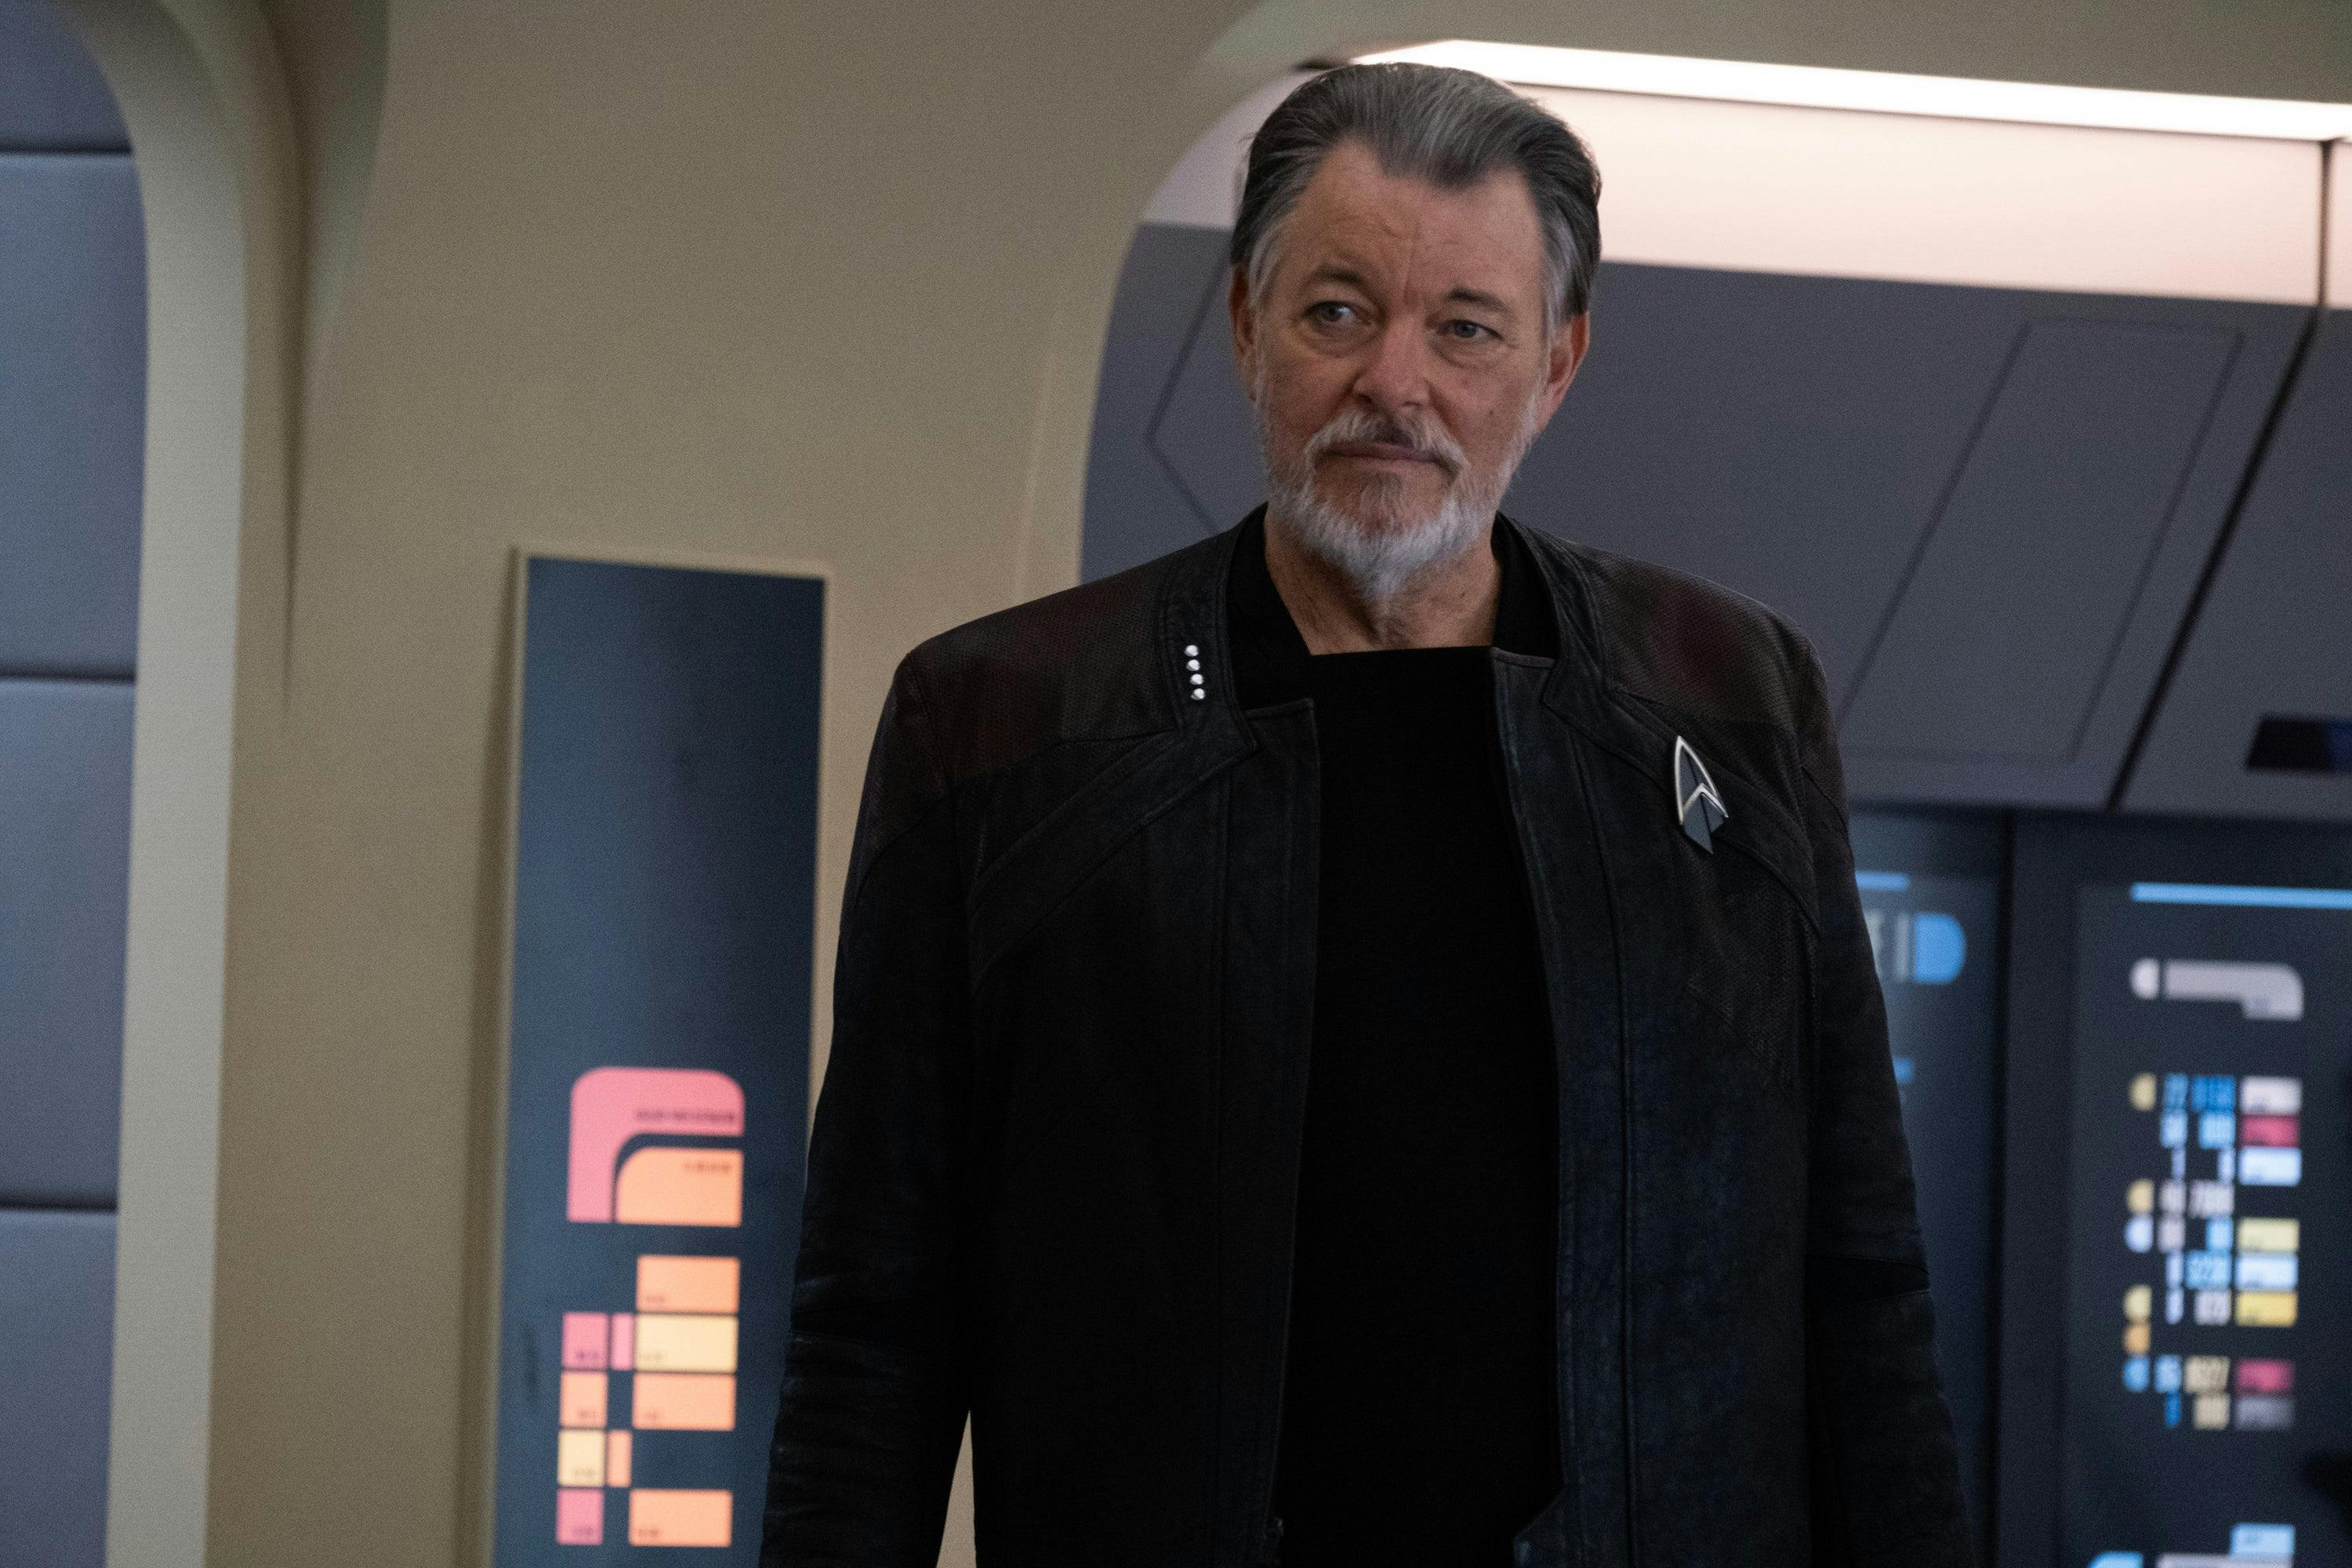 Will Riker stands aboard the reconstructed Enterprise-D in 'Vox'